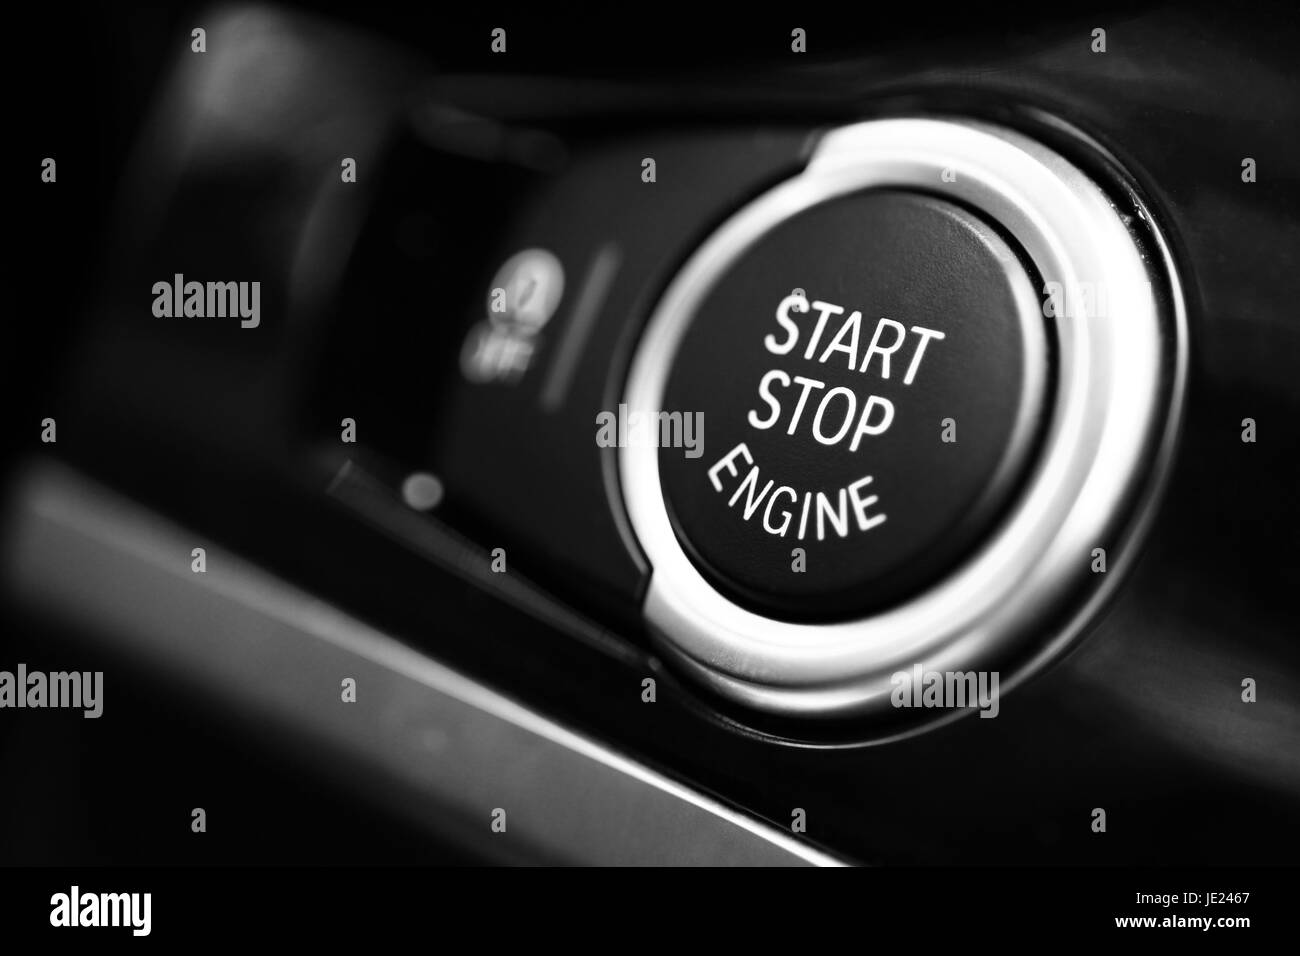 Detail on a black start button in a car. Stock Photo